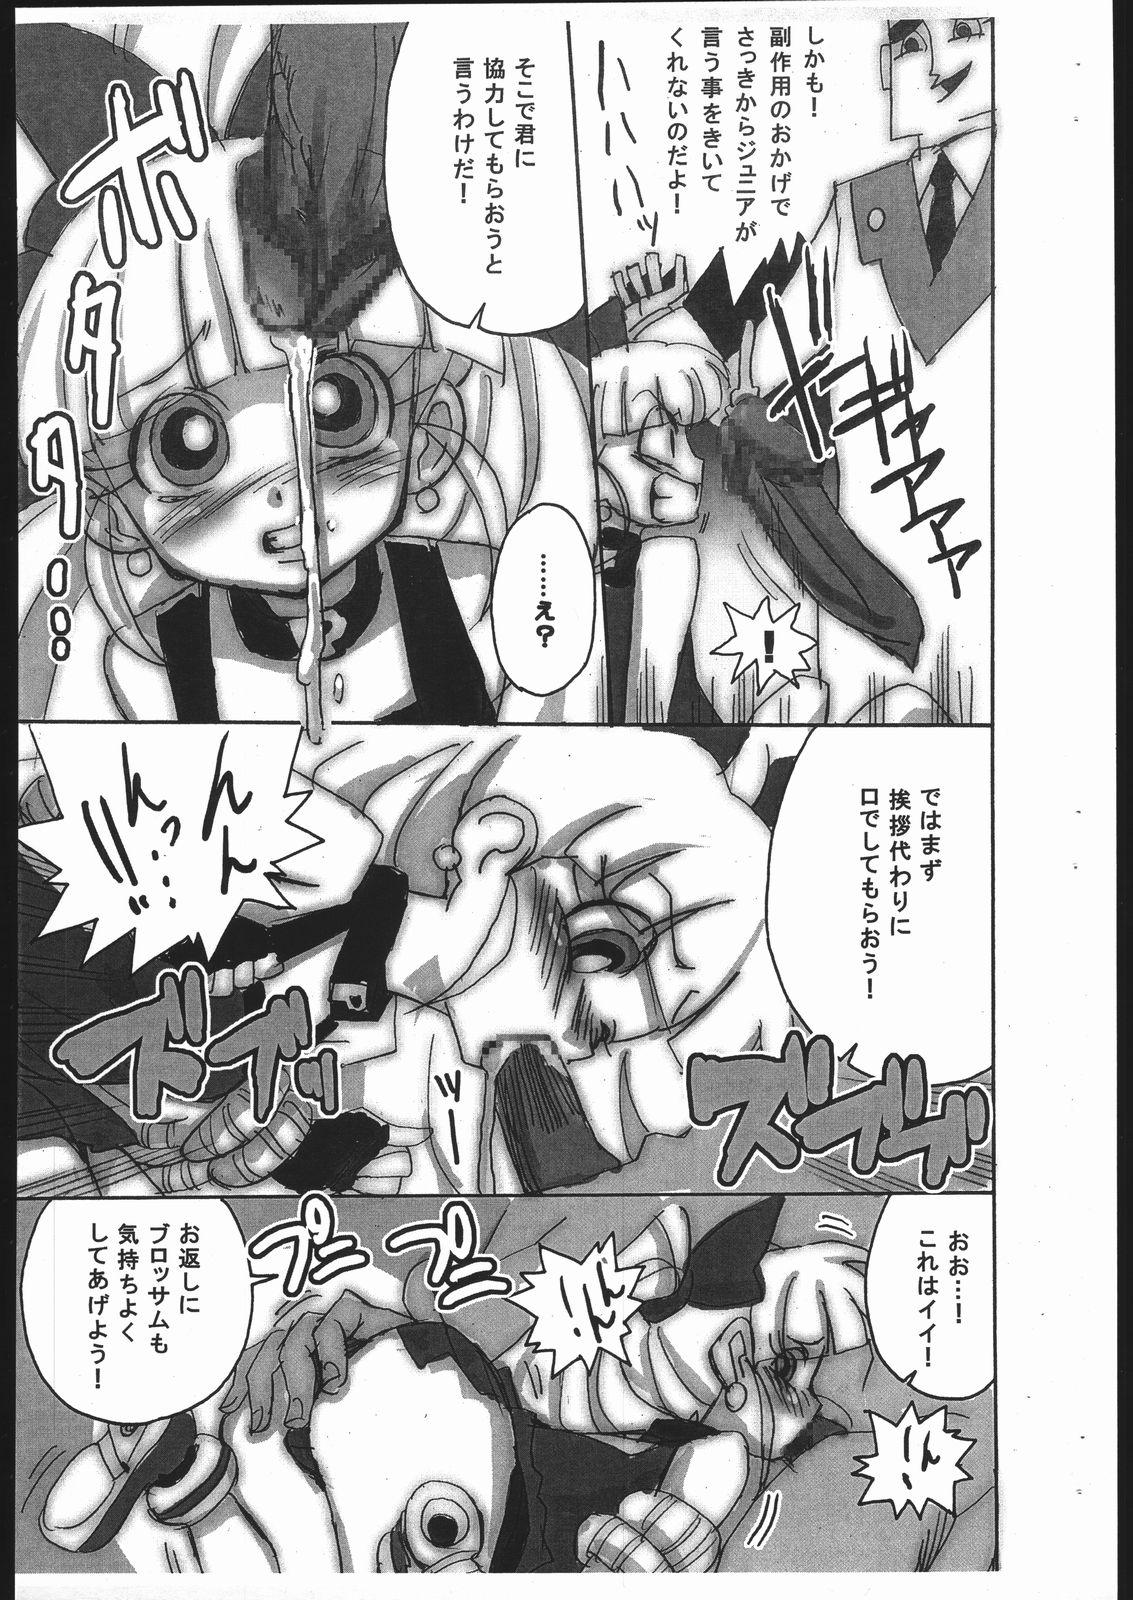 Lover PPGZH - Powerpuff girls z Screaming - Page 4